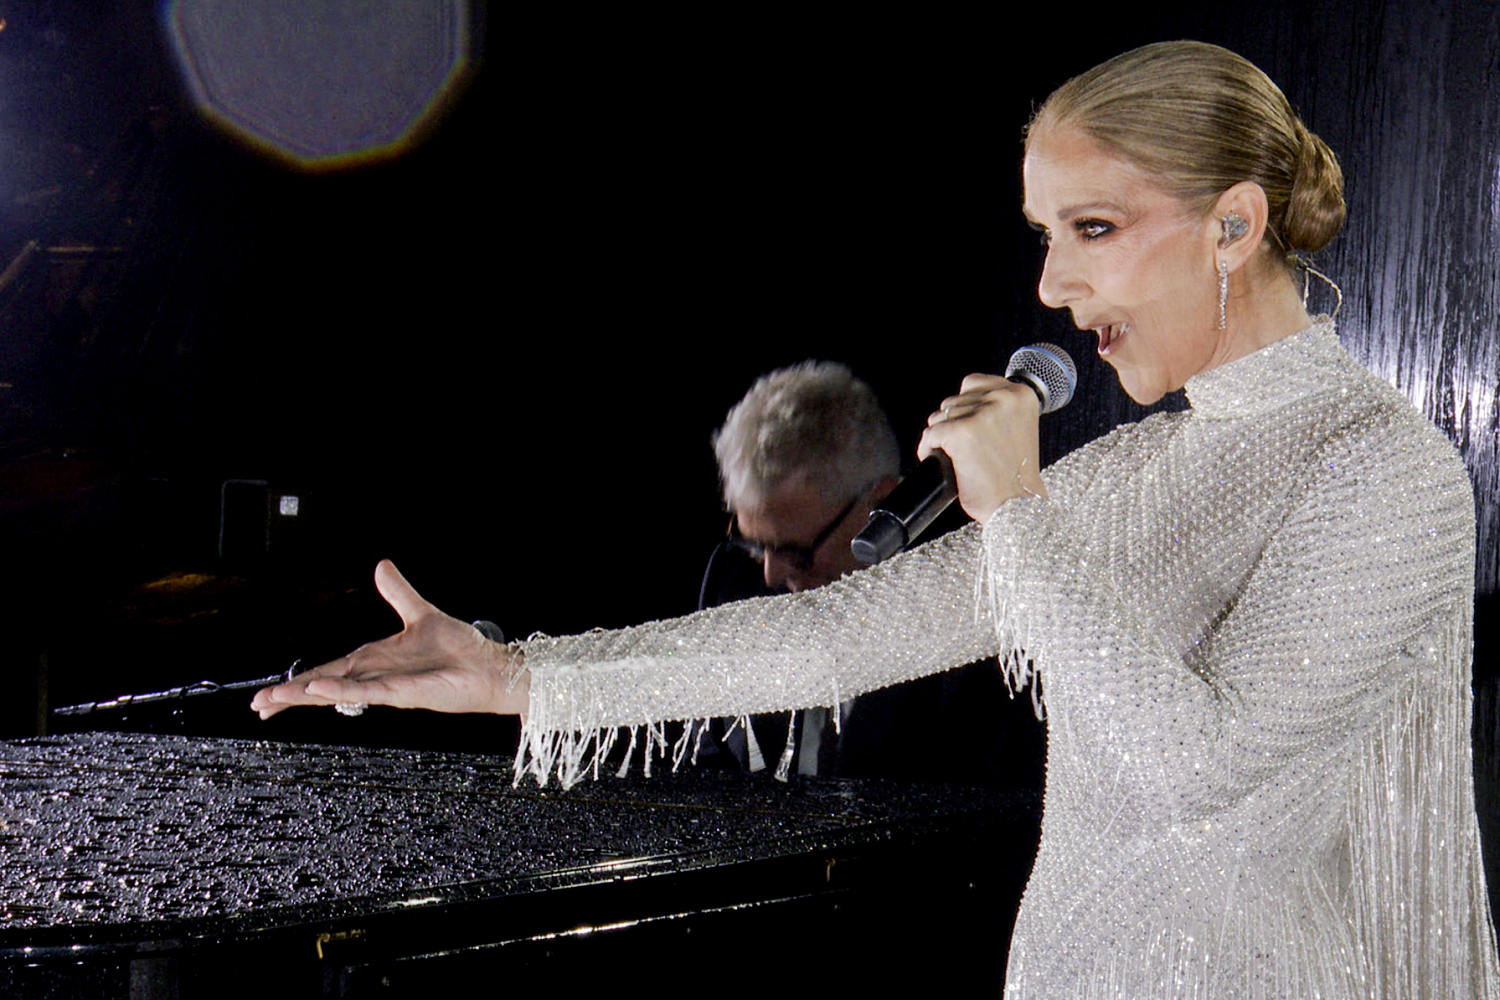 Fans share emotional reactions to Céline Dion's comeback at Paris Olympics